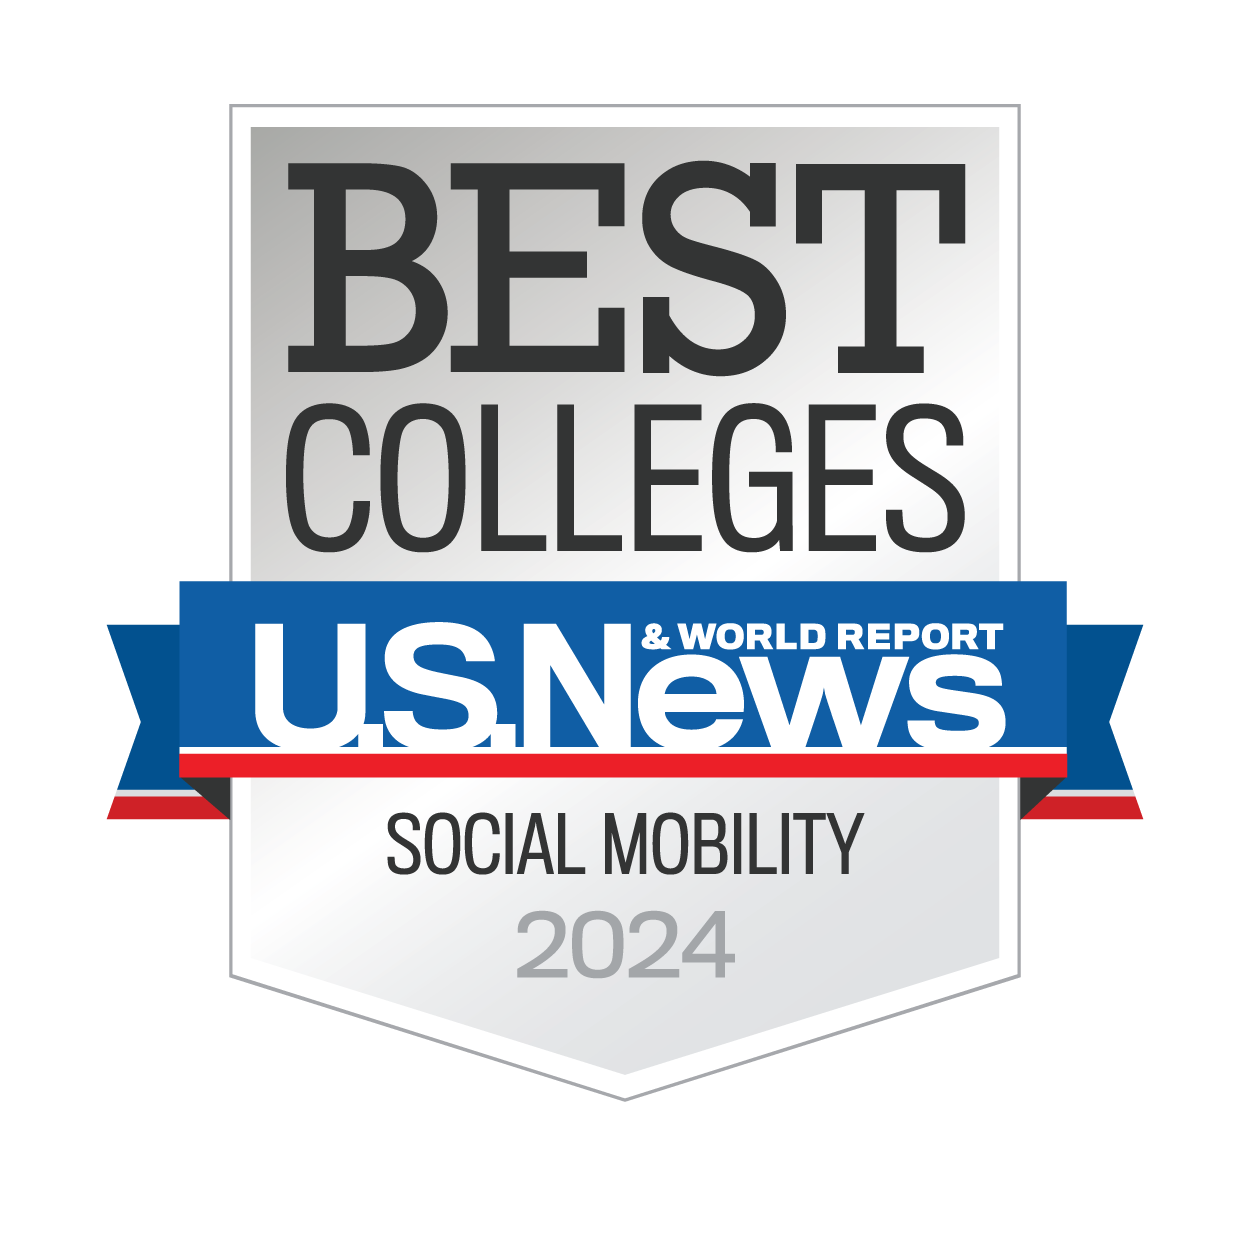 Best Colleges U.S. News & World Report Social Mobility 2024